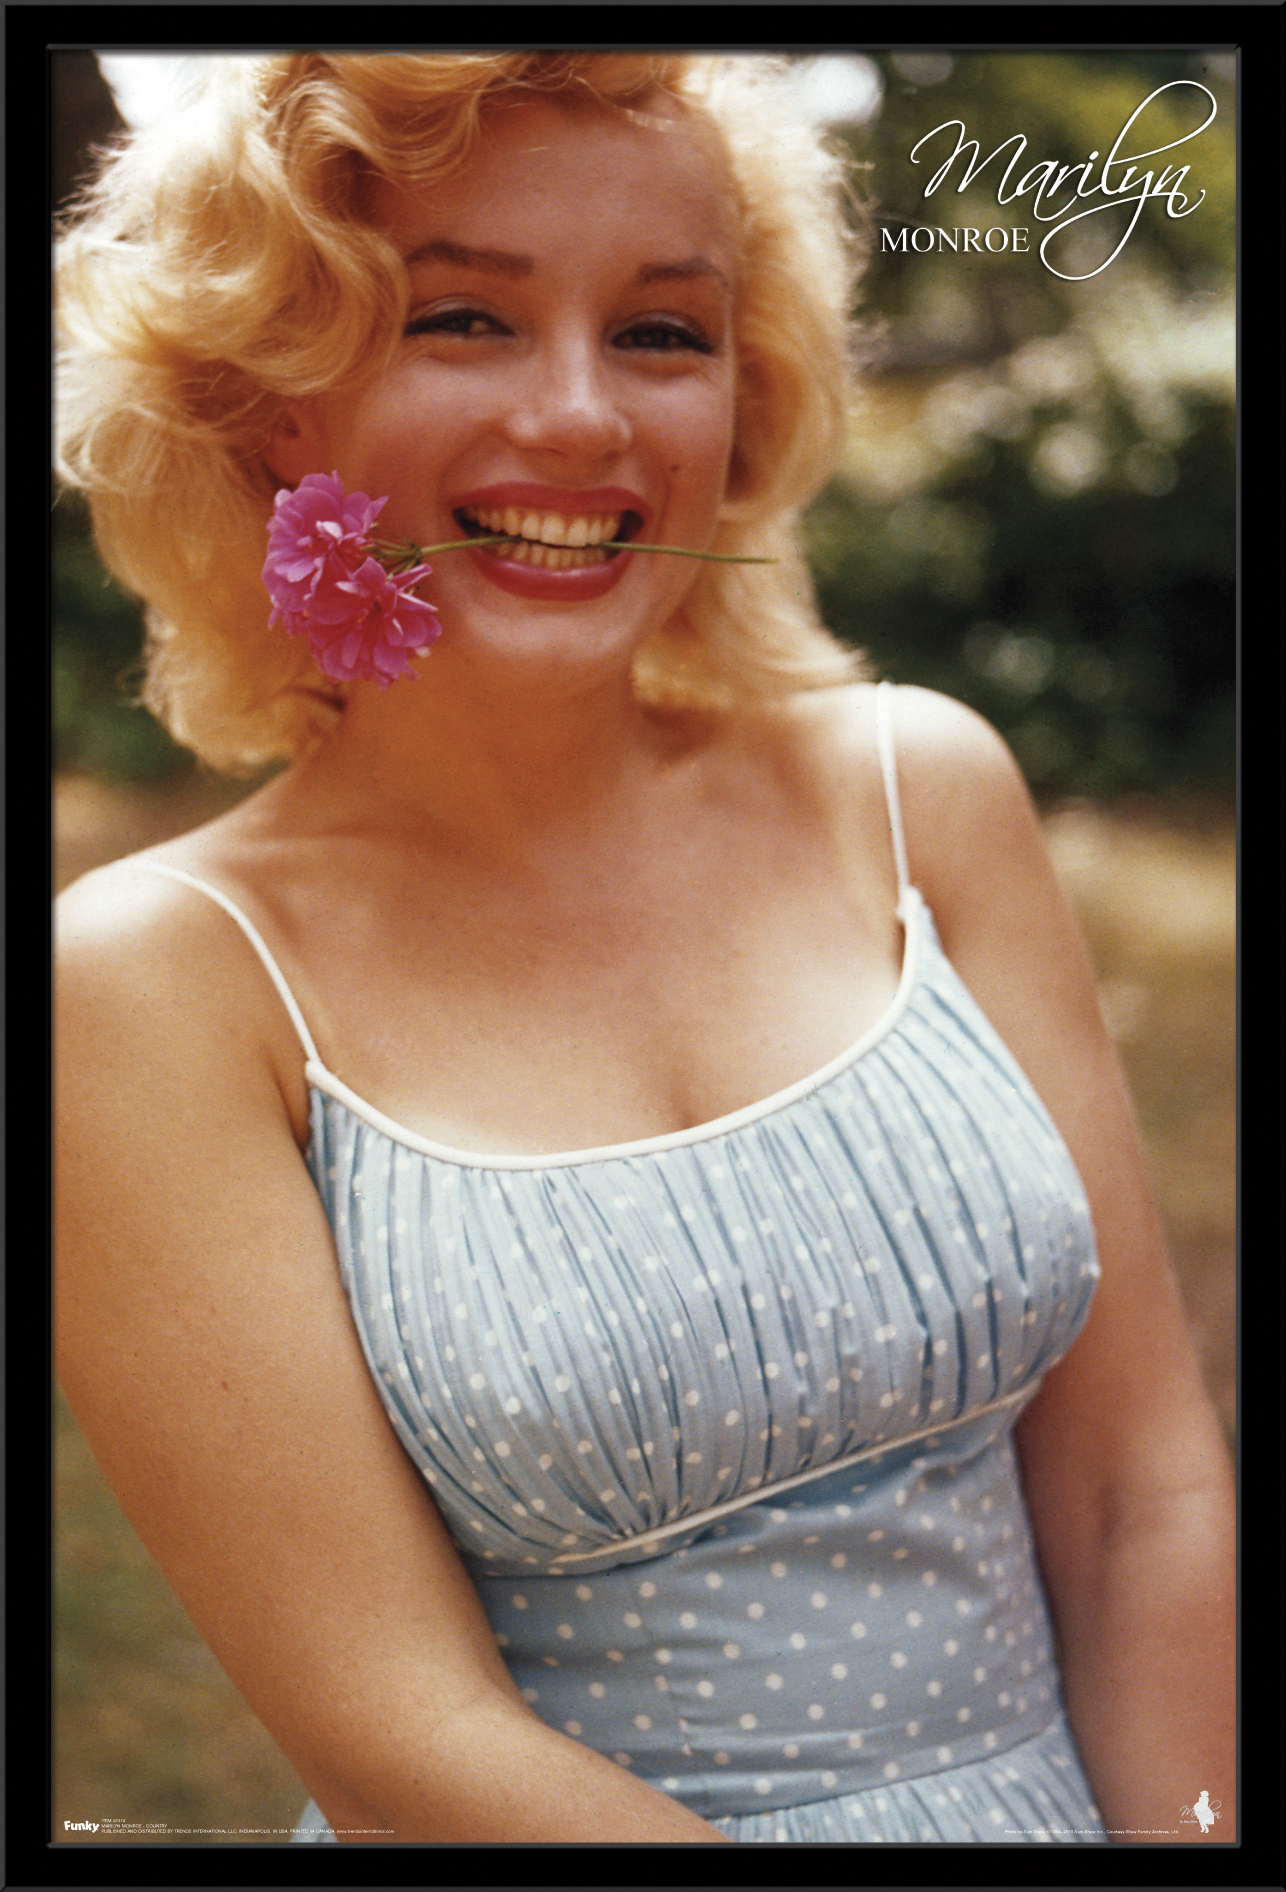 Marilyn Monroe - Country - image 1 of 2